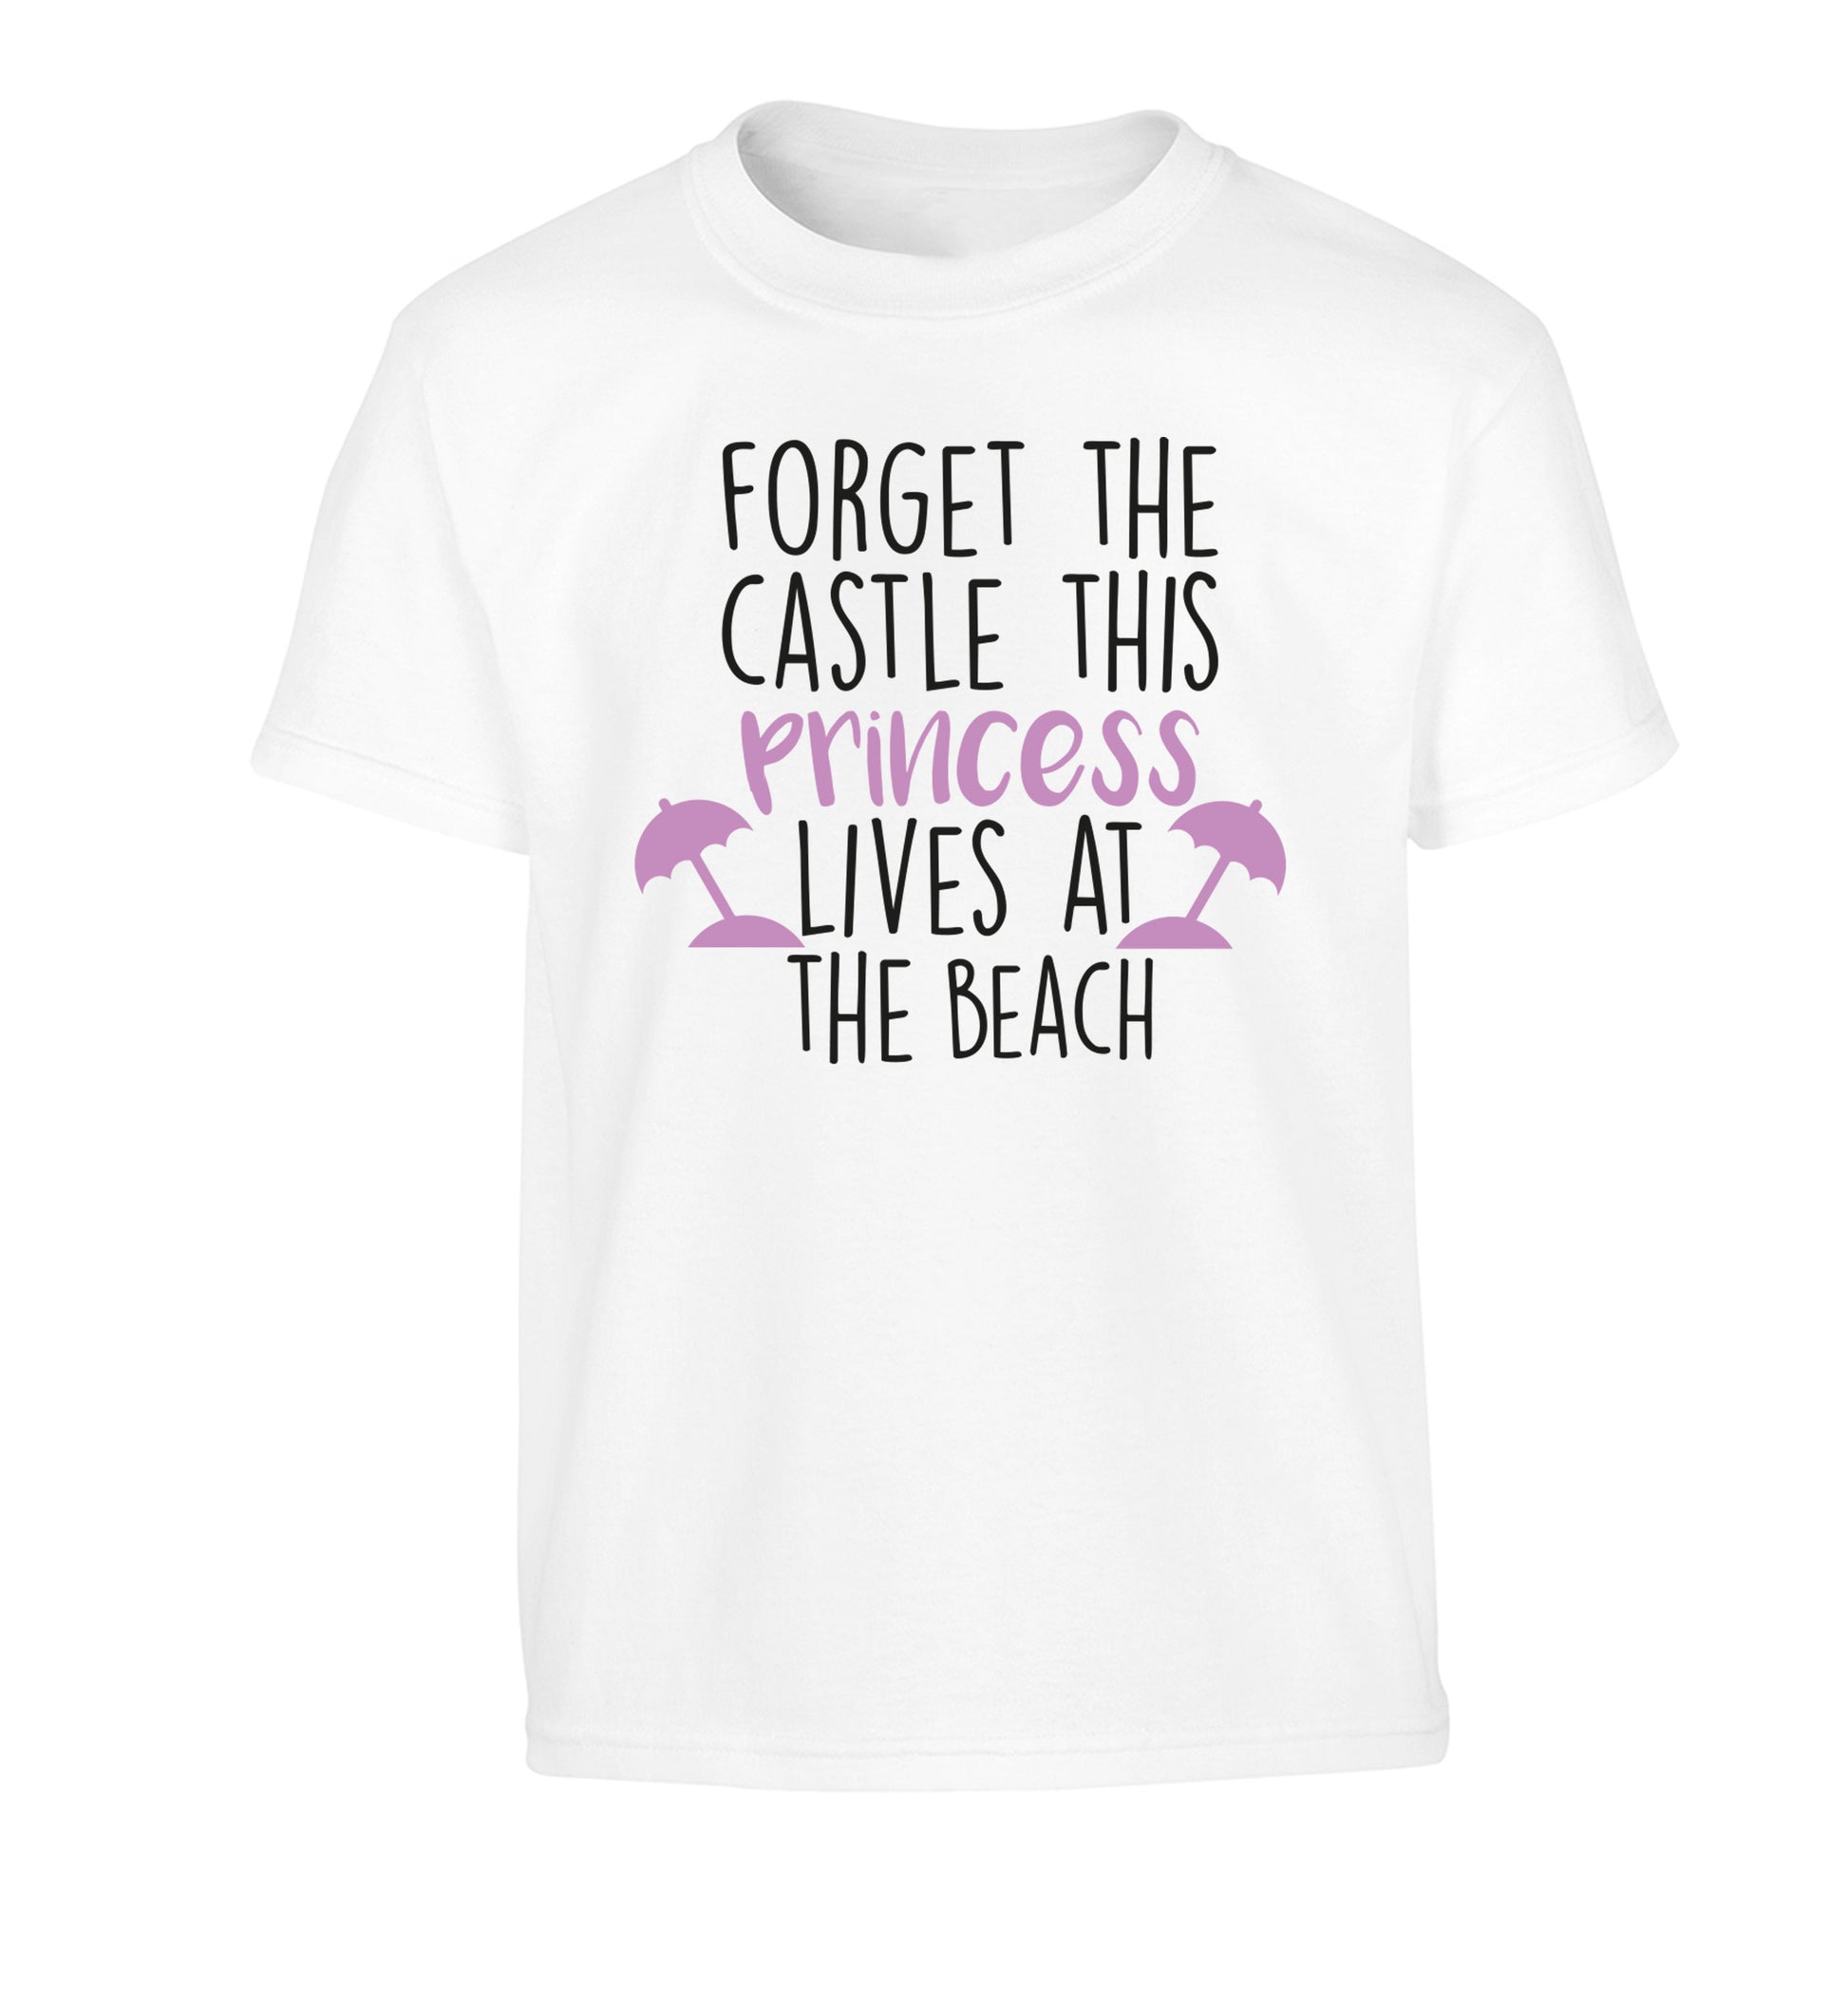 Forget the castle this princess lives at the beach Children's white Tshirt 12-14 Years